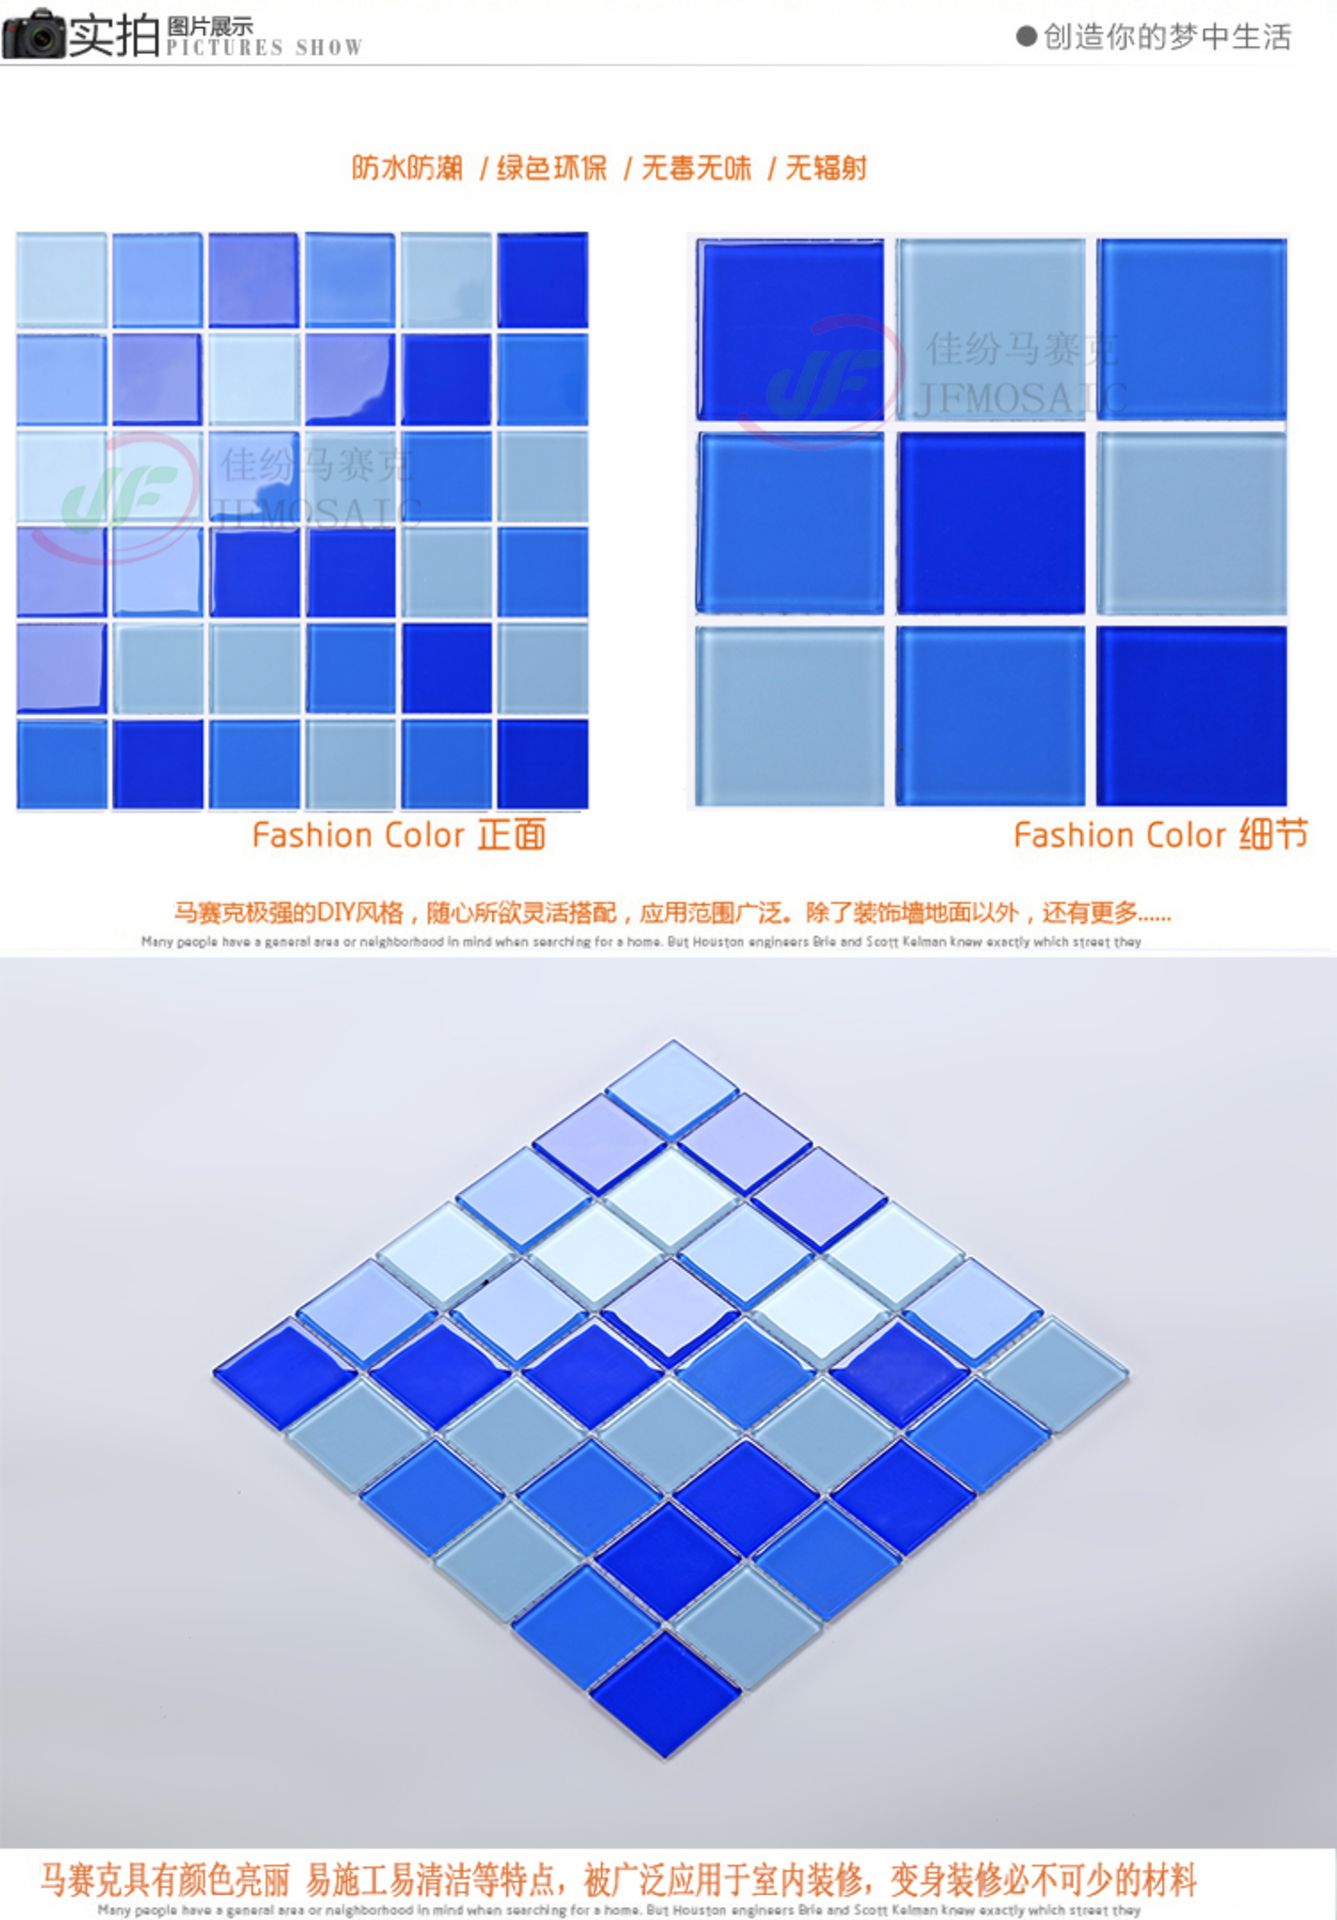 2 Square Metres - High Quality Glass Mosaic Tiles- Super Saver 300*300*4mm* 22 sheets - Image 2 of 2